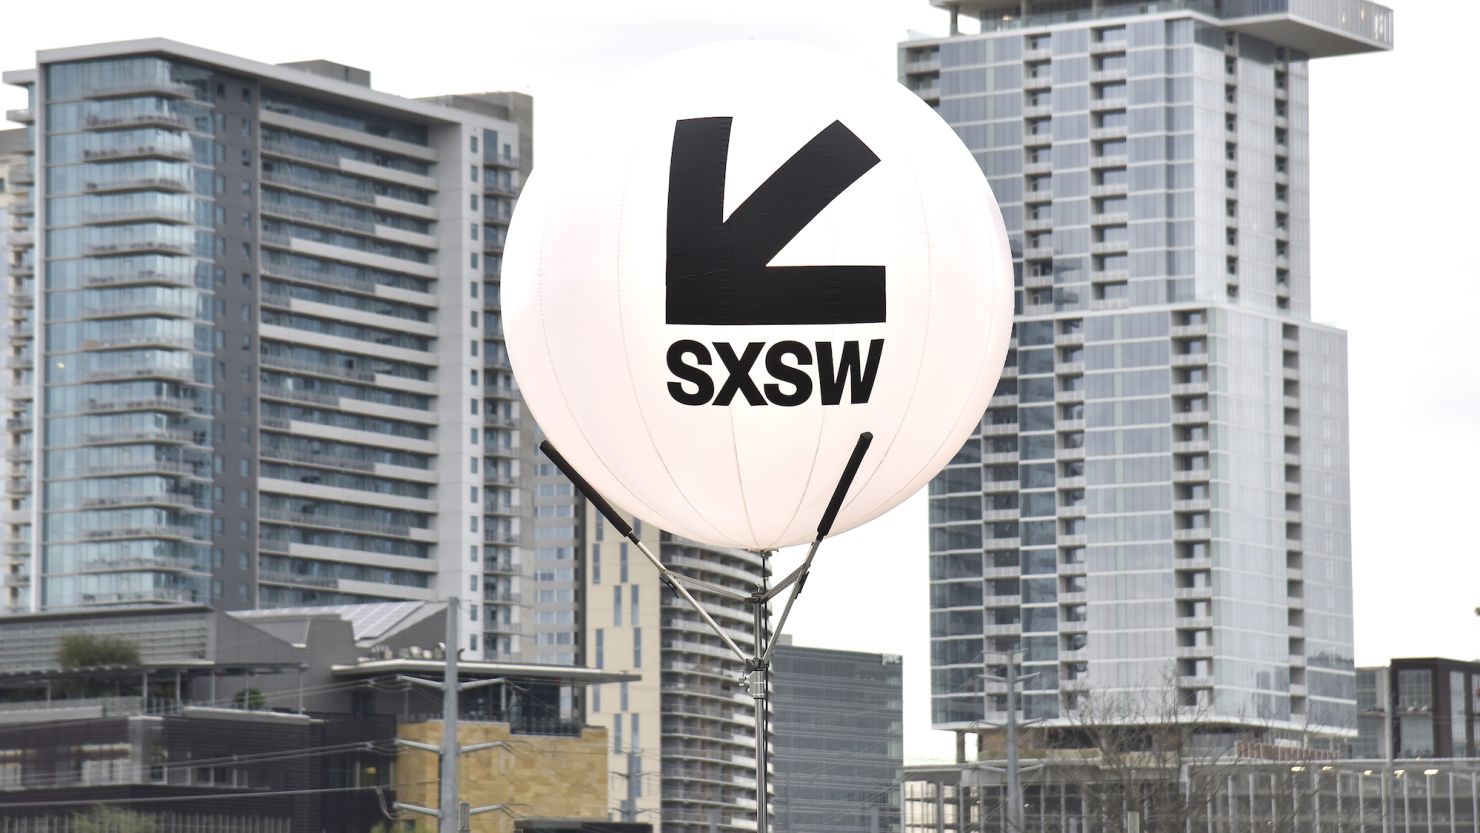 Some artists have pulled out of the South by Southwest festival in Austin, Texas, in recent days.